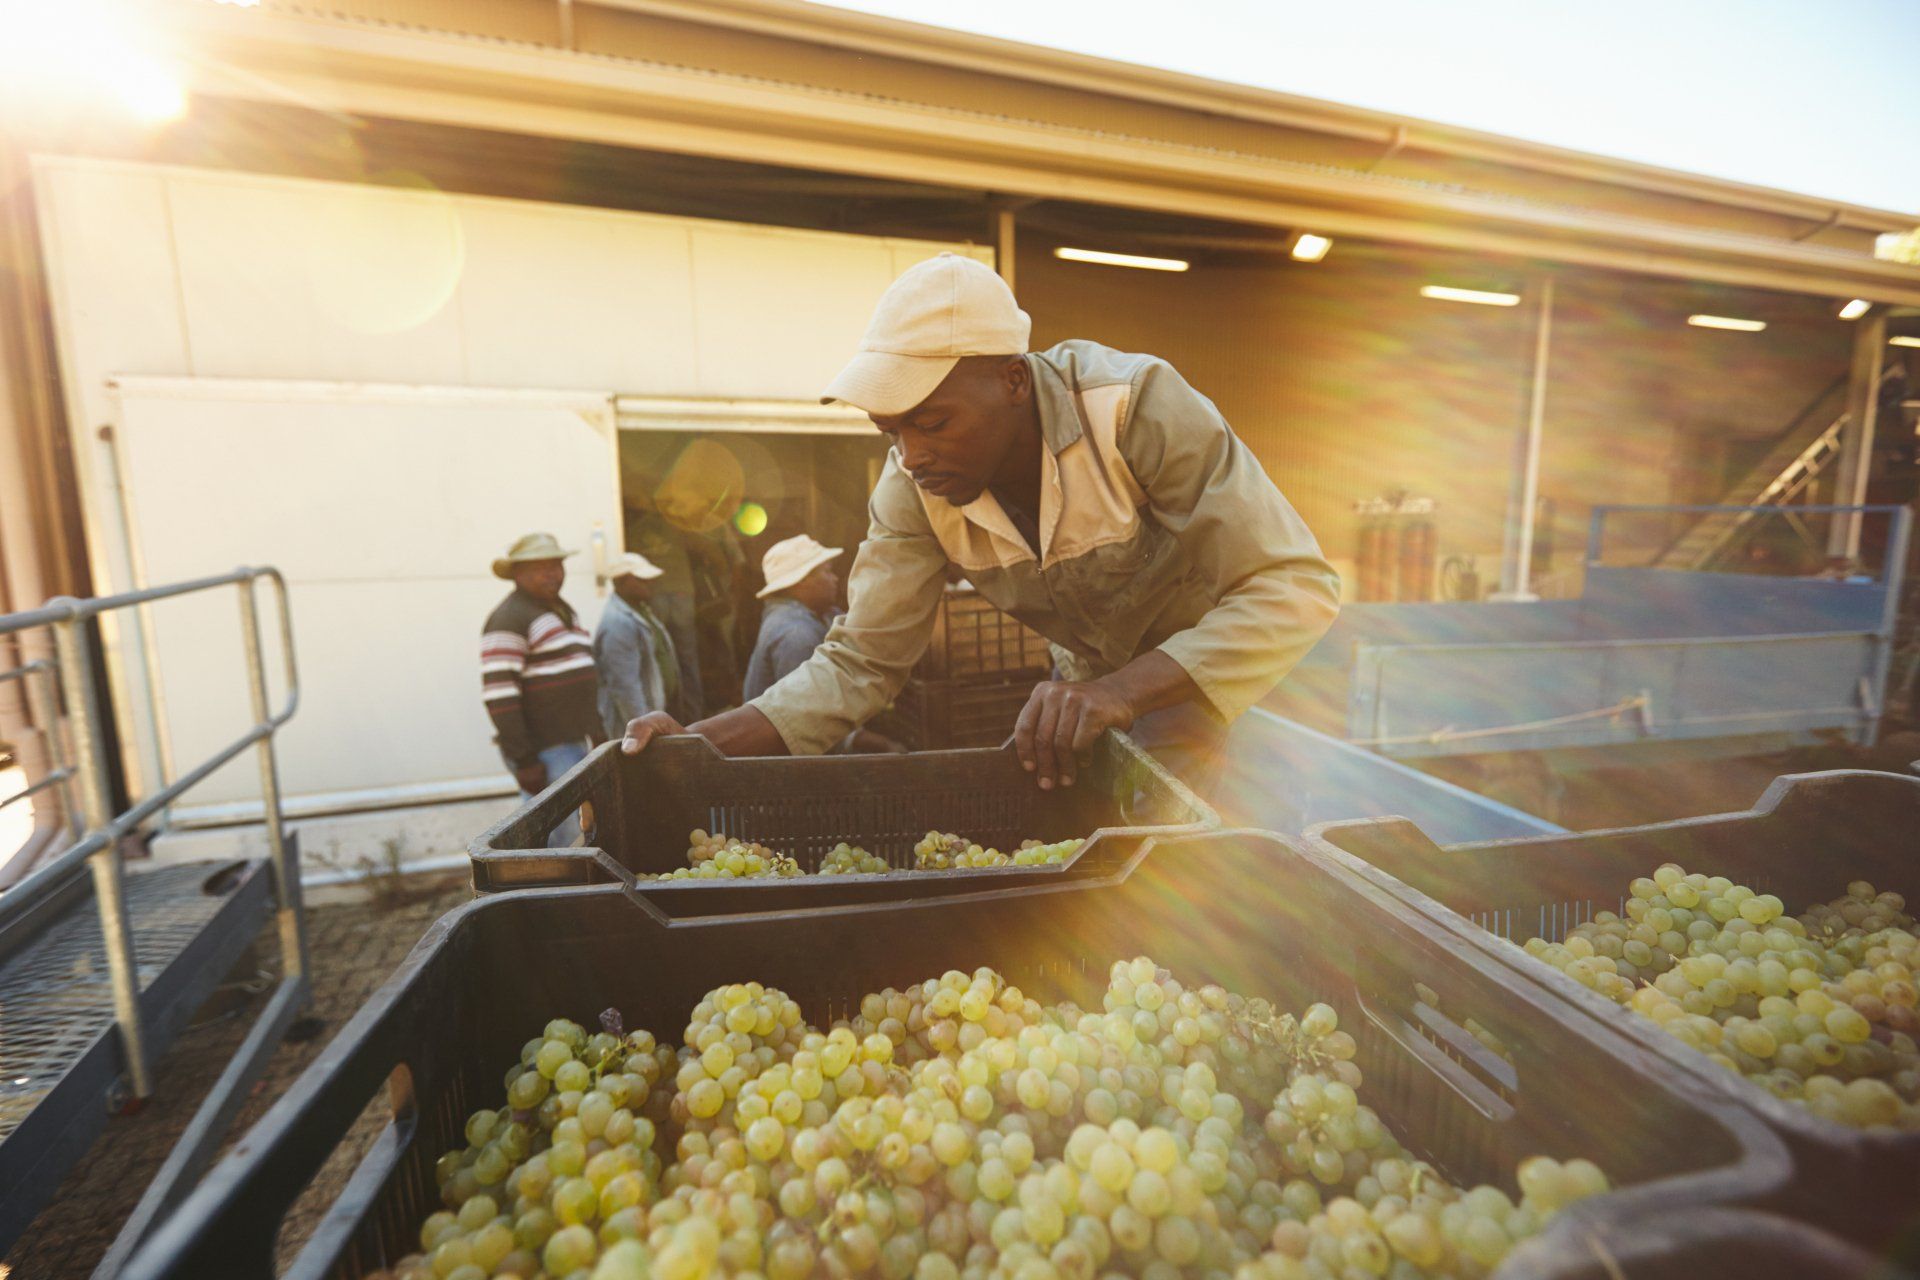 Image of a Black man wearing a beige cap unloading crates of green grapes from the back of a truck.